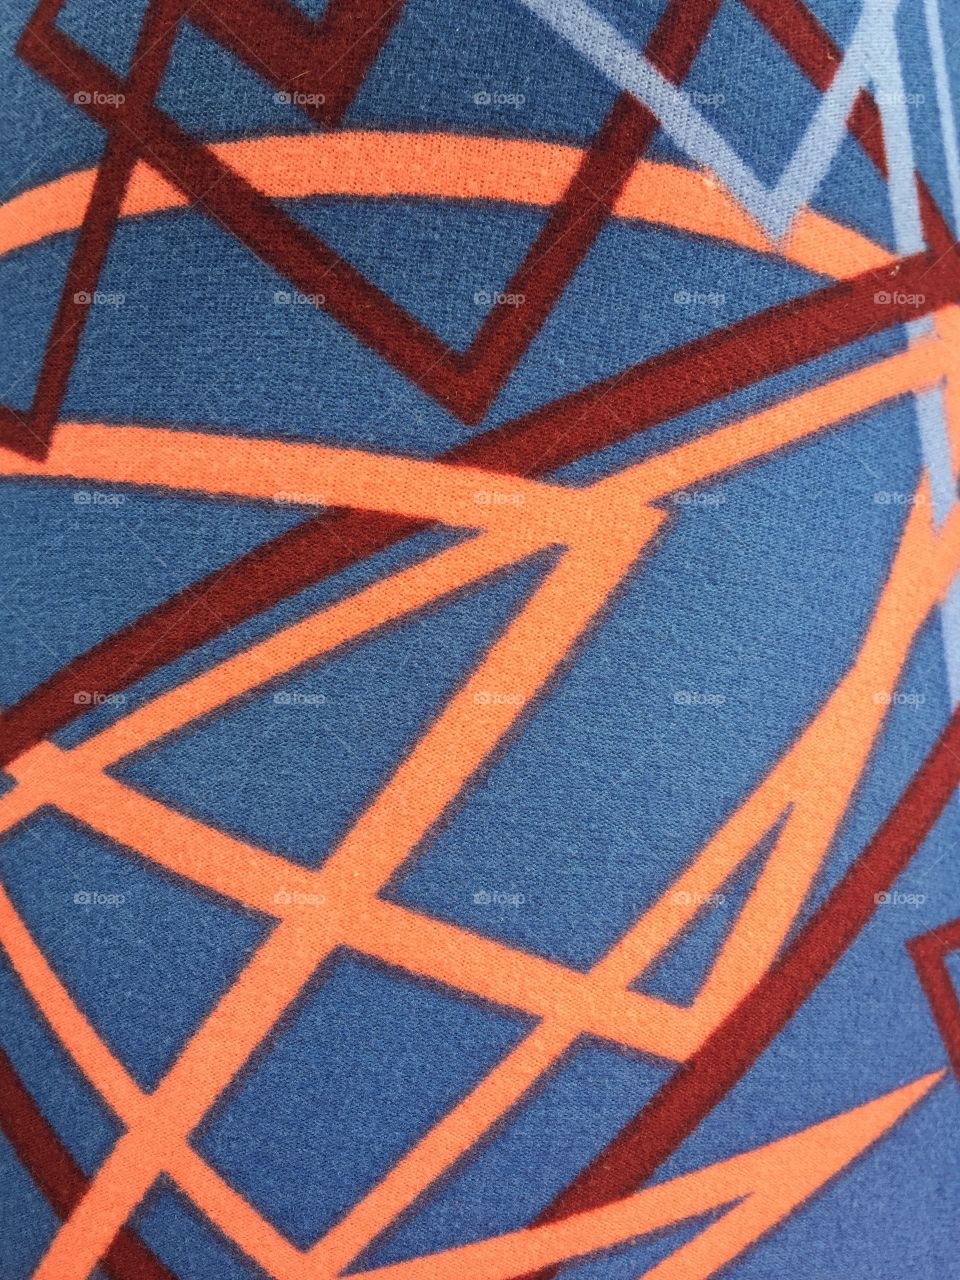 Abstract pattern 